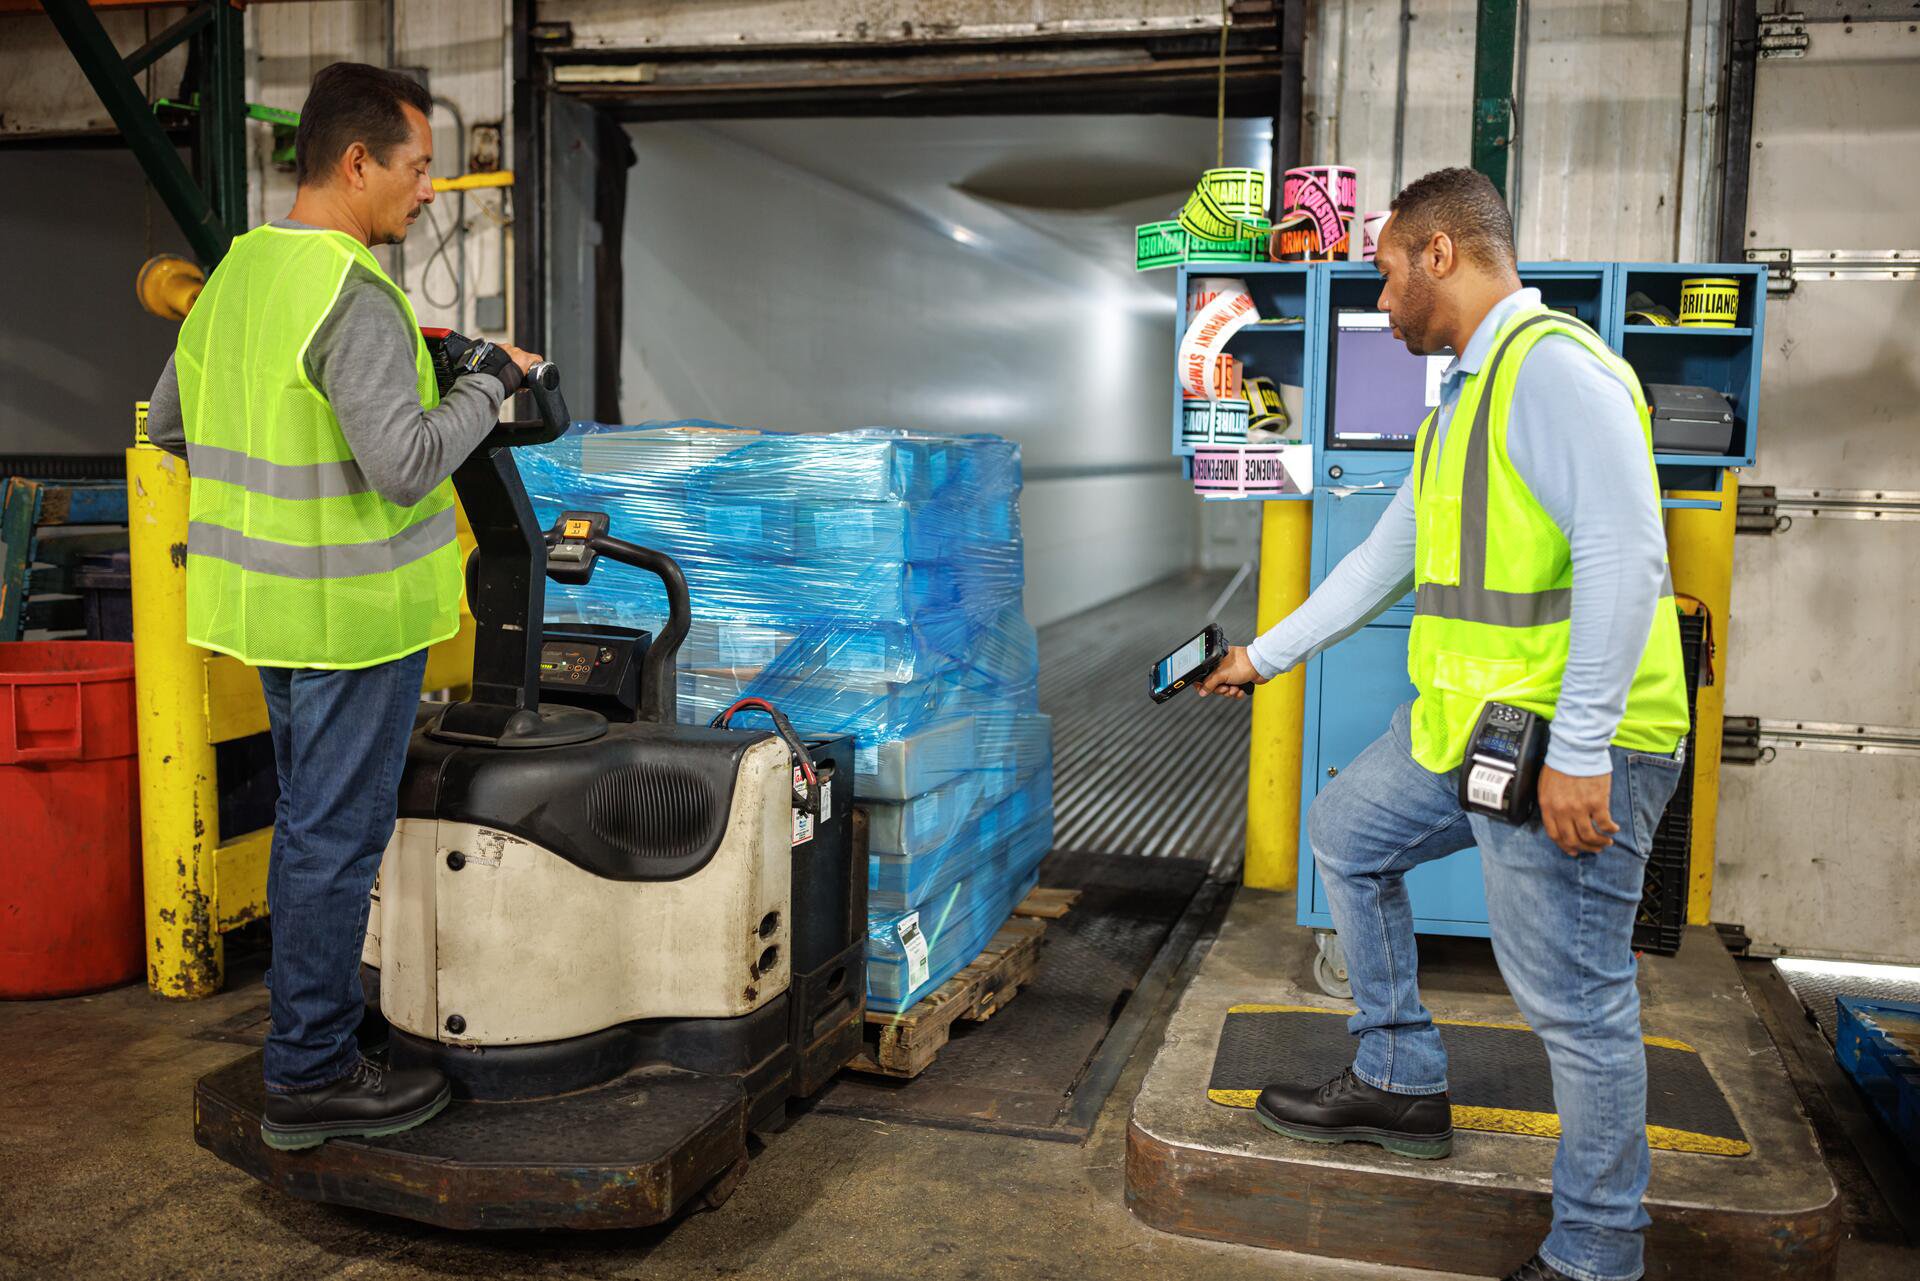 2 warehouse workers using a Zebra Technologies ZQ610 rugged mobile printer to print labels for a pallet of boxes